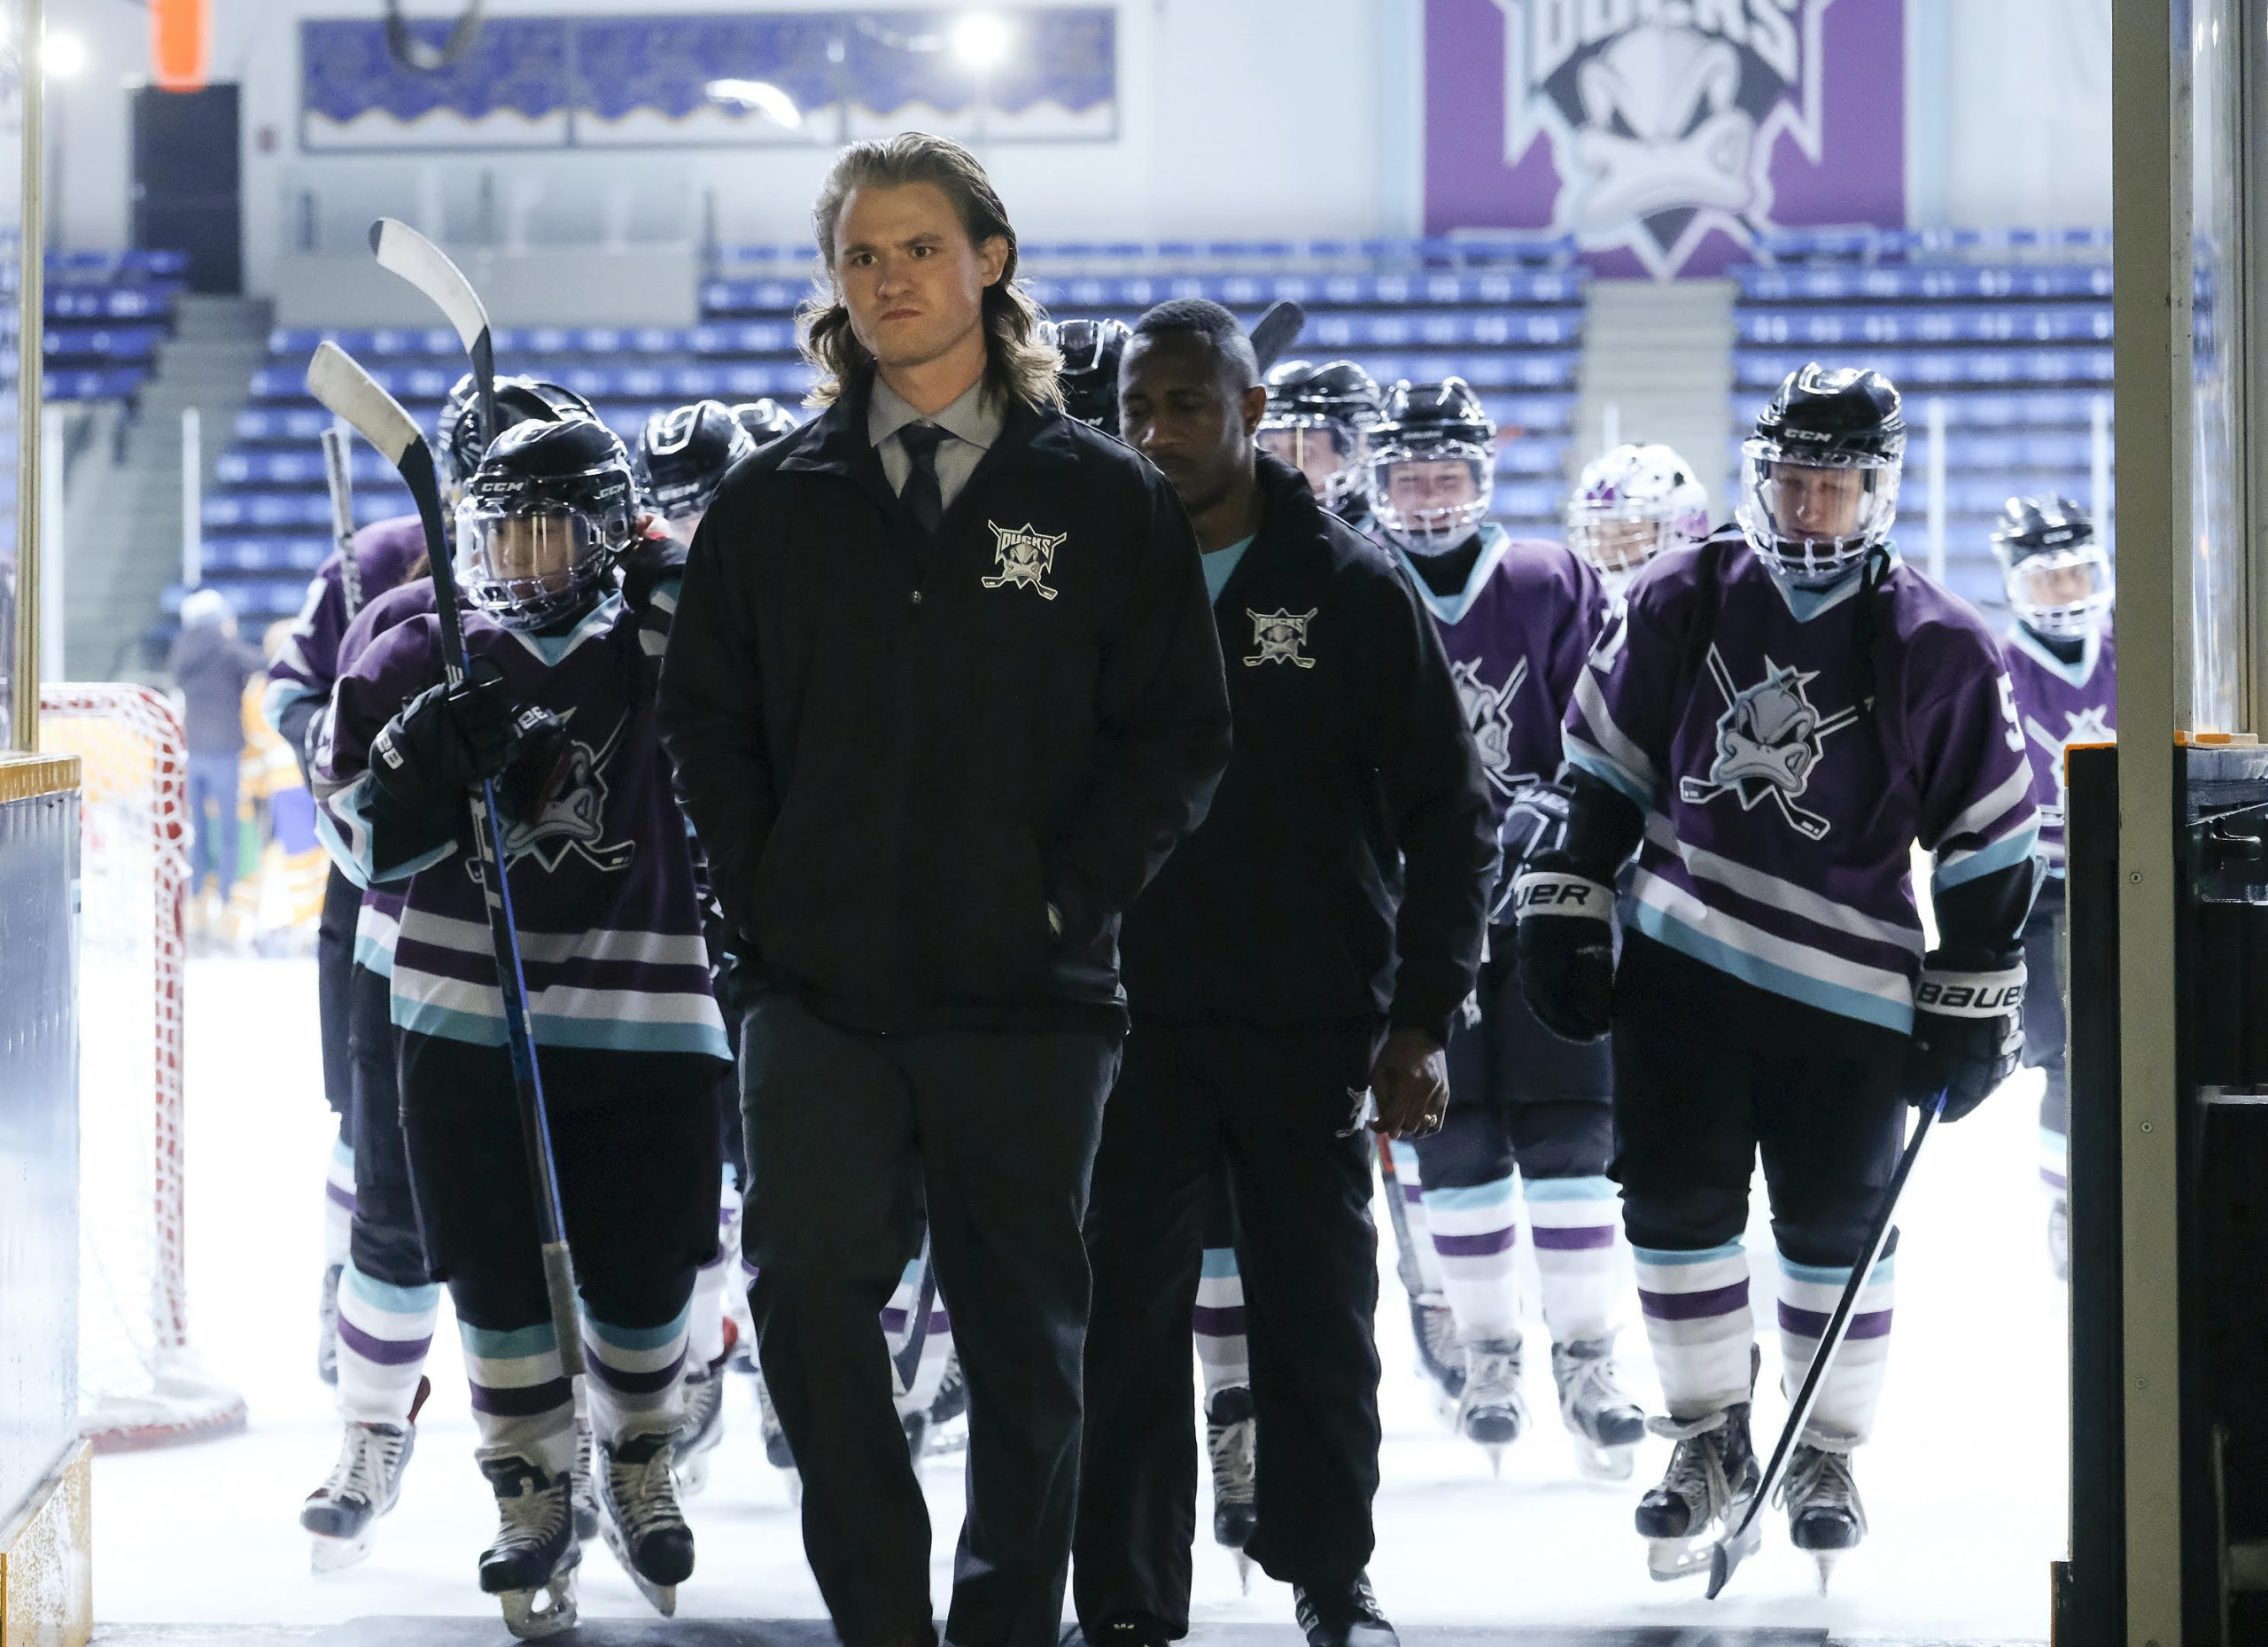 When Does The Mighty Ducks: Game Changers Come Out?